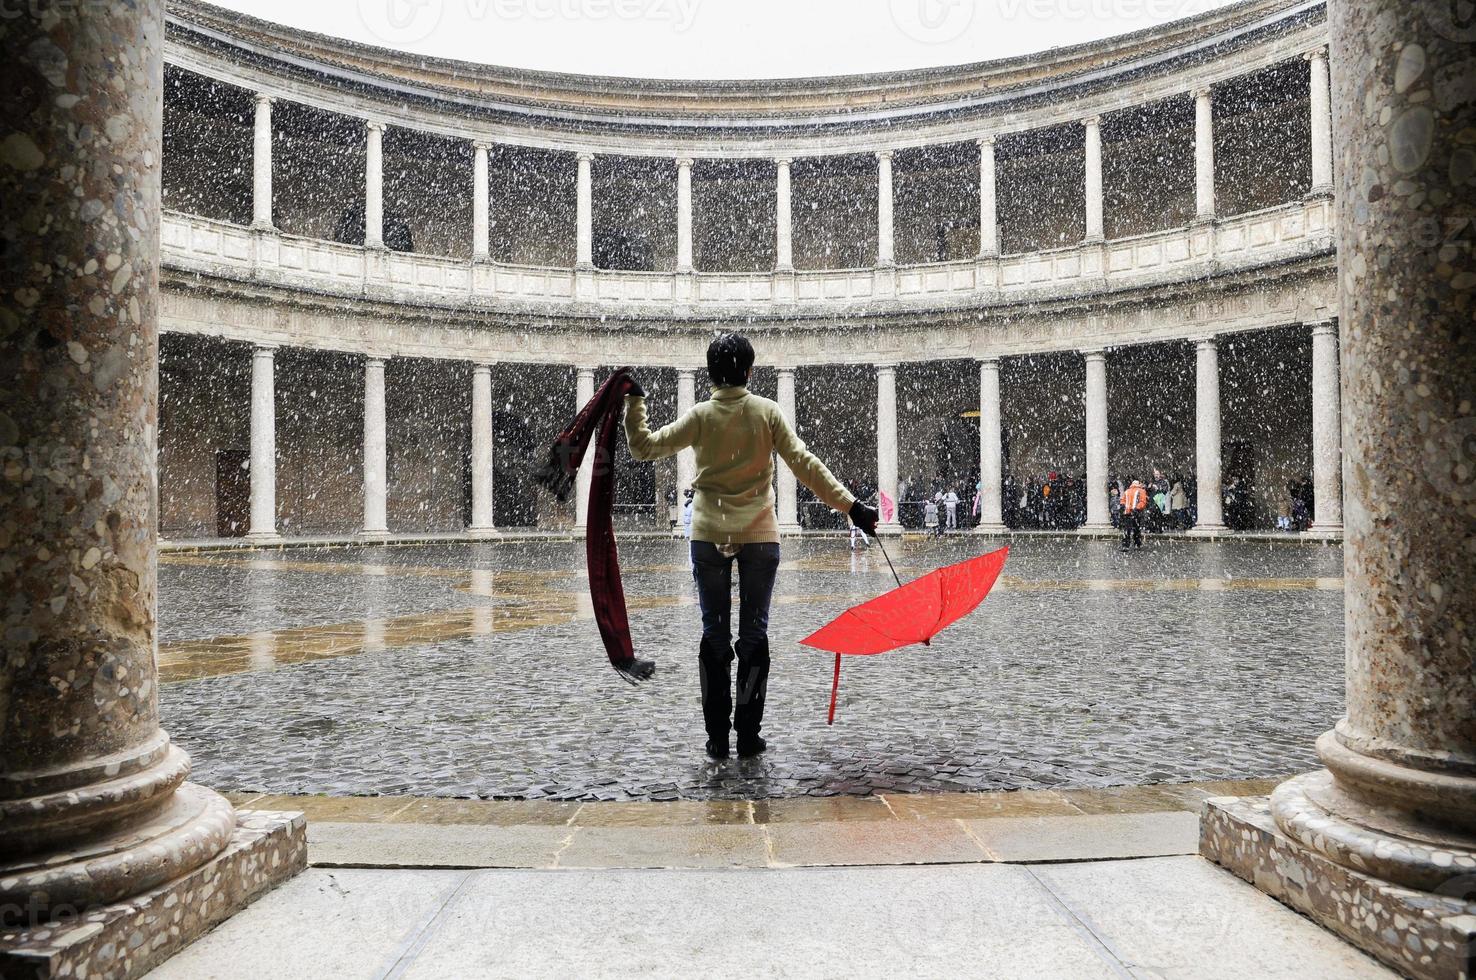 Snowing over woman with red umbrella in palace photo